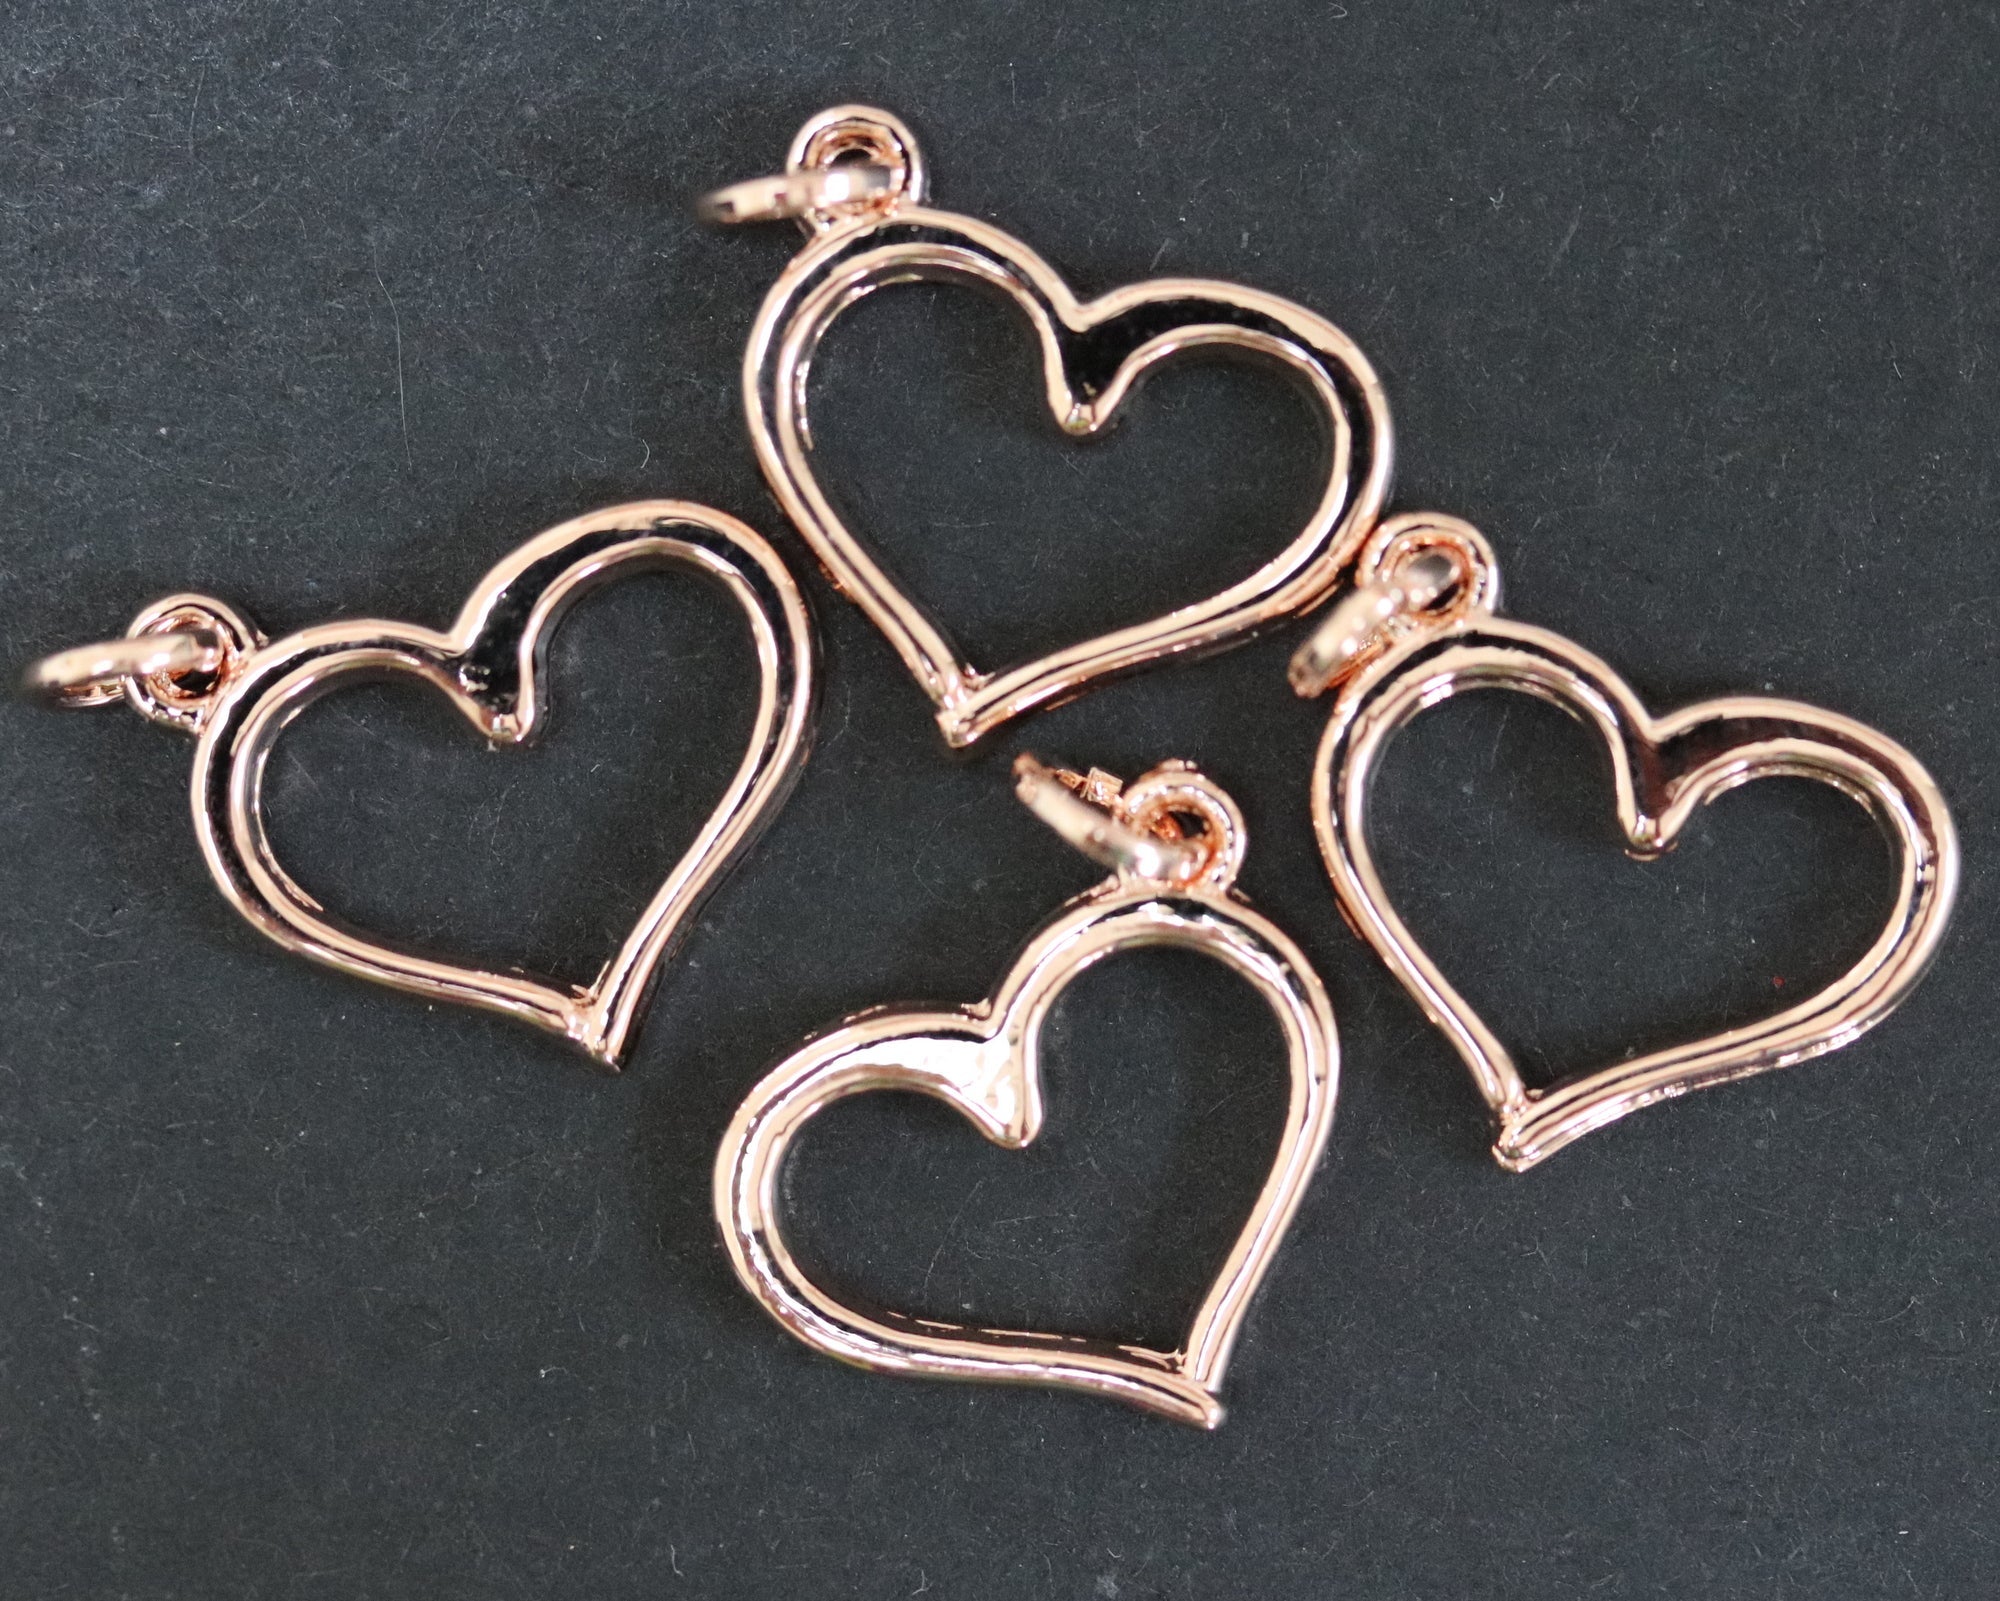 Heart charm 13x16mm 14K Rose Gold plated metal alloy pendant charm